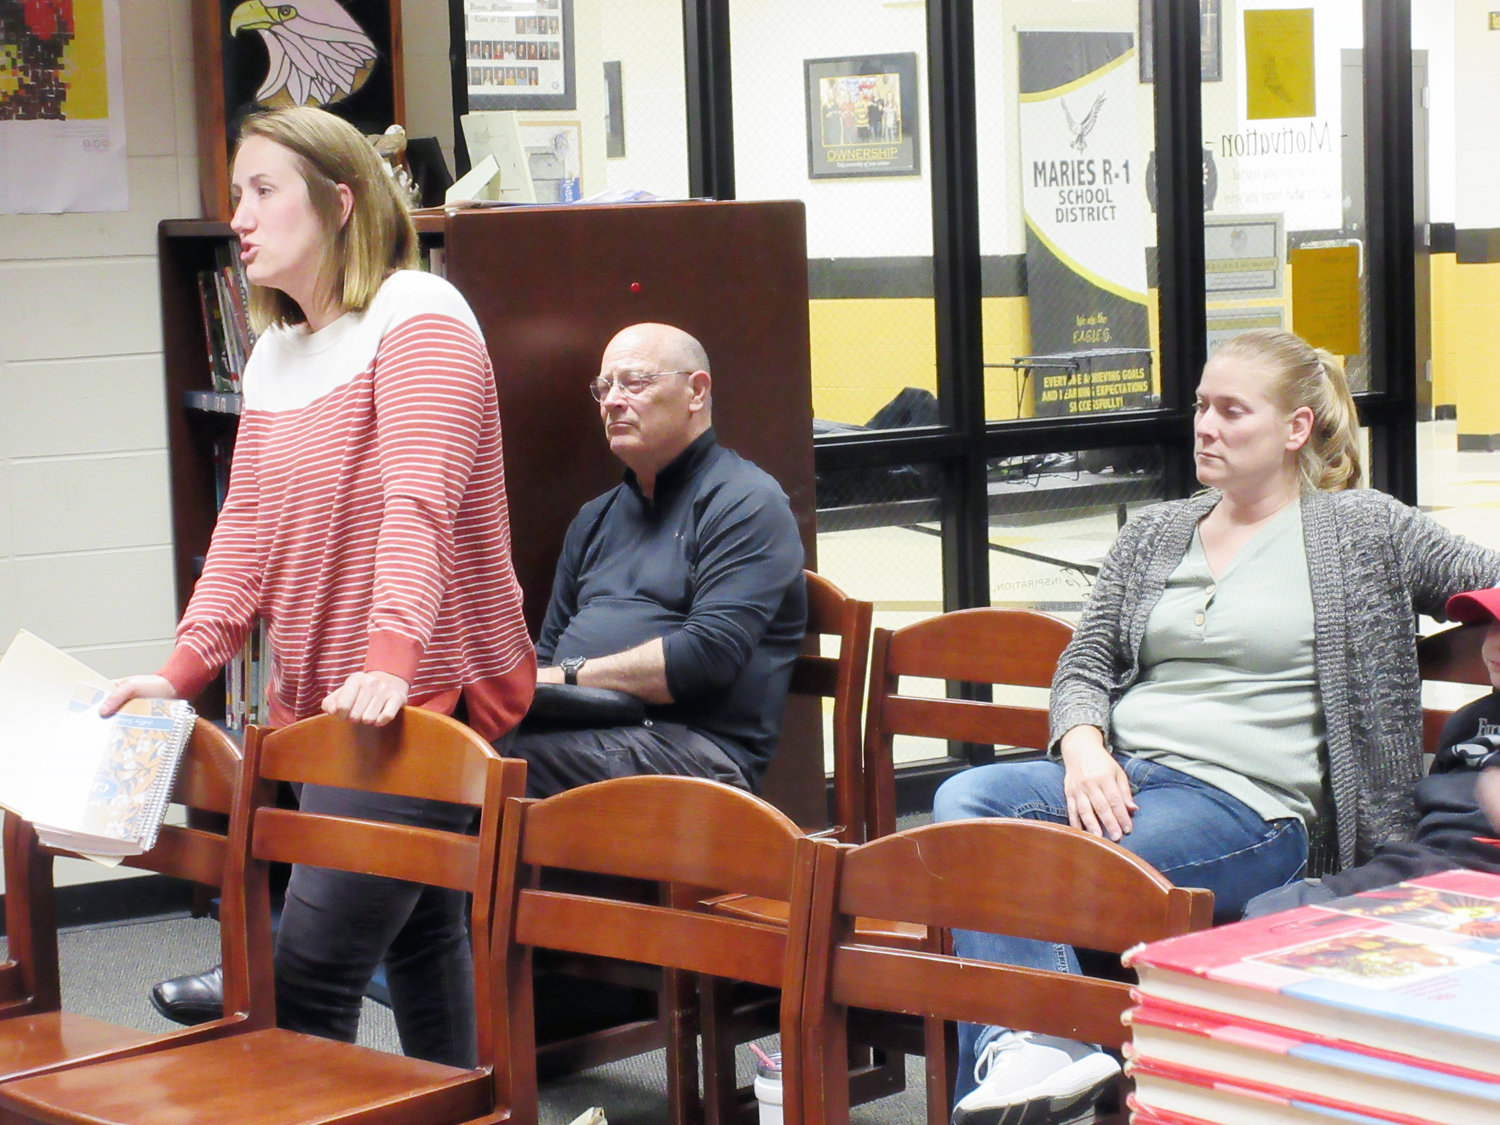 Deacon Michael Brooks and Visitation Inter-Parish School (VIPS) parents, Courtney Jeremy and Beth Wulff were present to answer any questions the school board members have about allowing VIPS students on R-1 athletic teams.